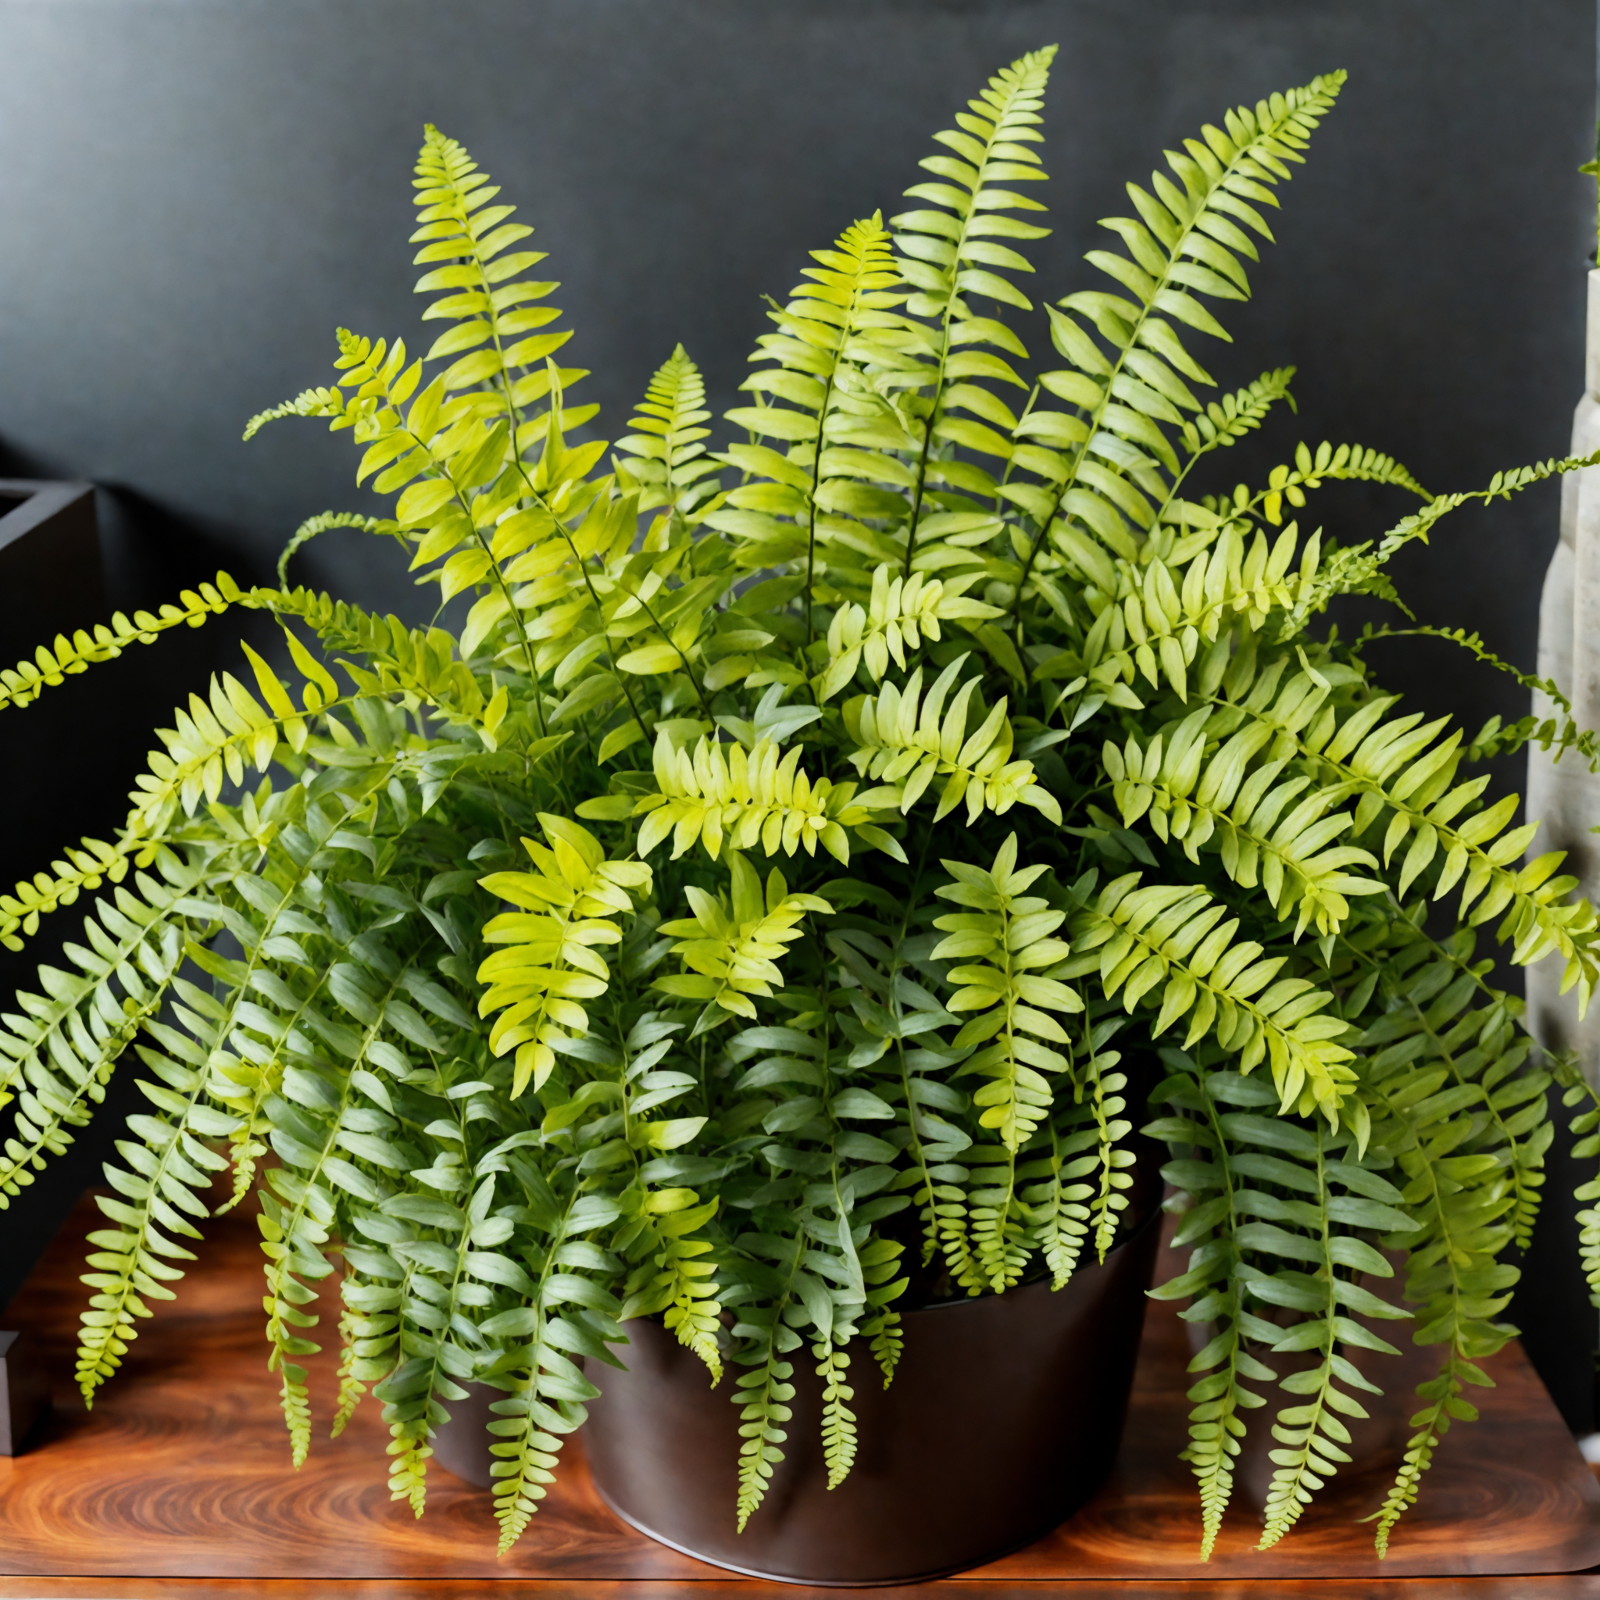 Nephrolepis exaltata (Boston fern) in a brown vase on a wooden table, clear lighting, neutral setting.